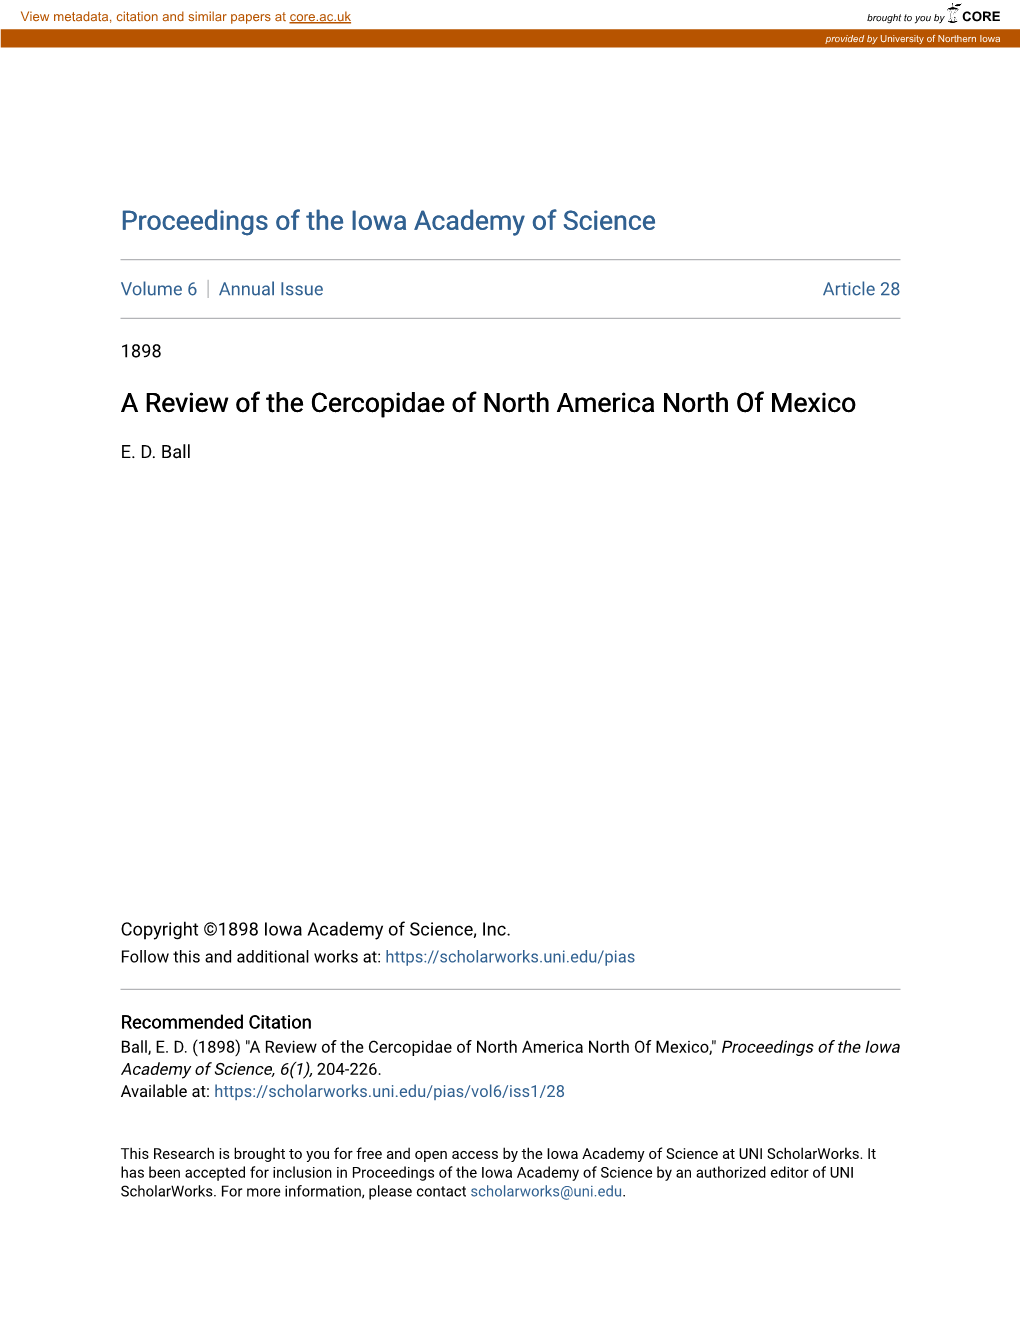 A Review of the Cercopidae of North America North of Mexico